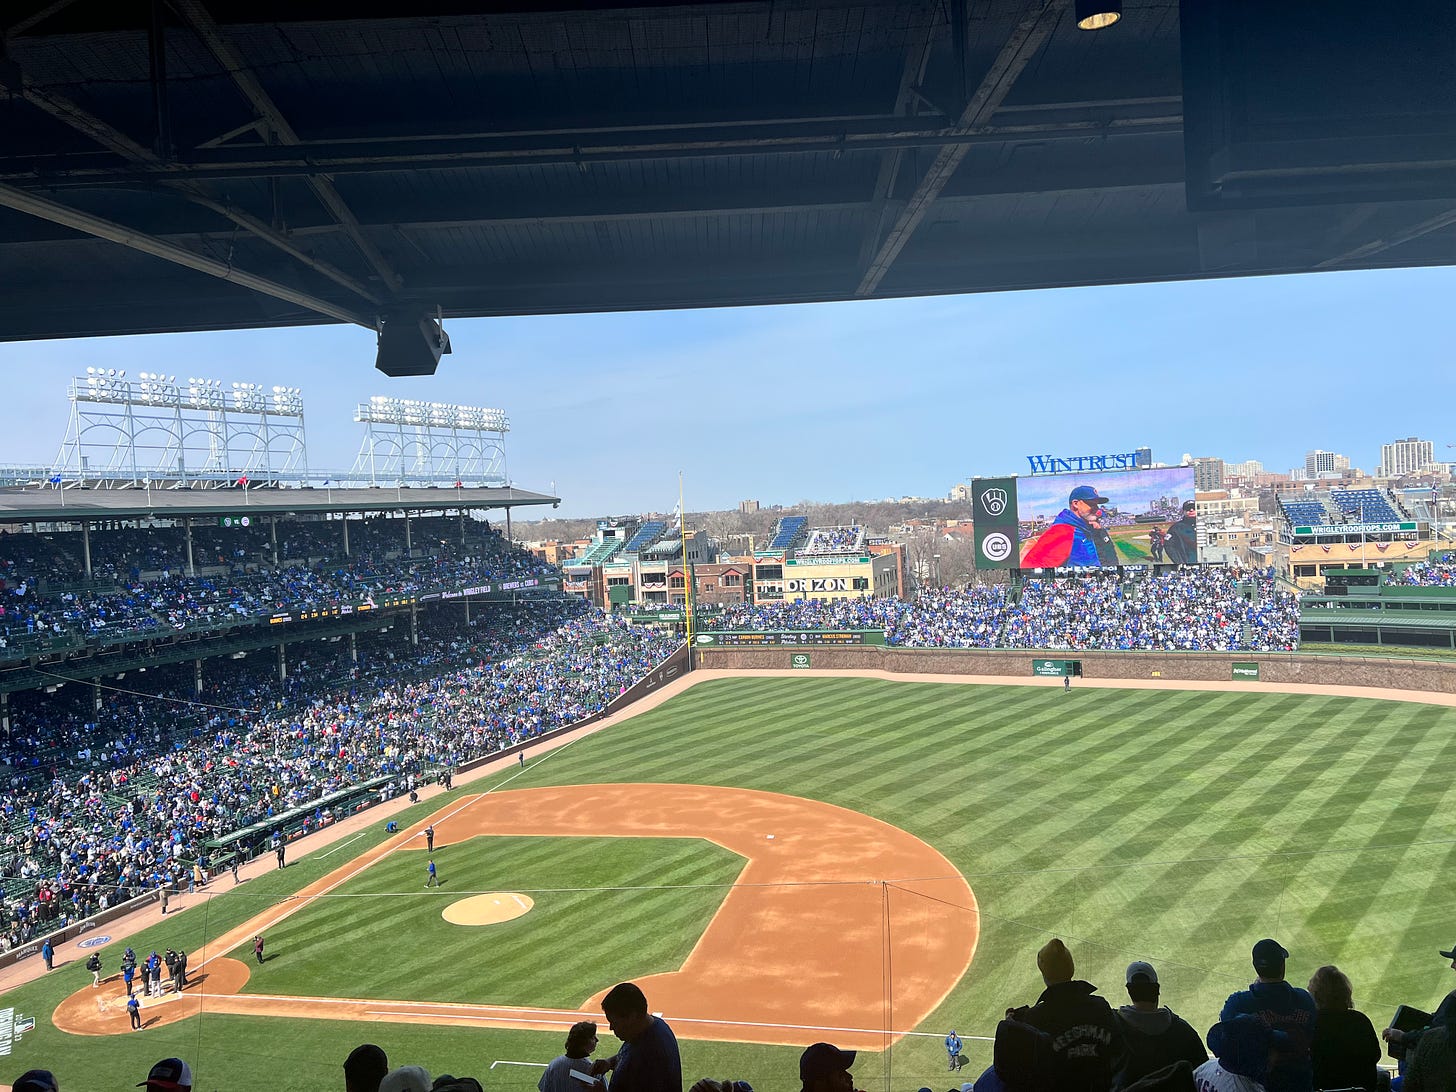 Photo of Wrigley Field before gameplay on Opening Day 2023